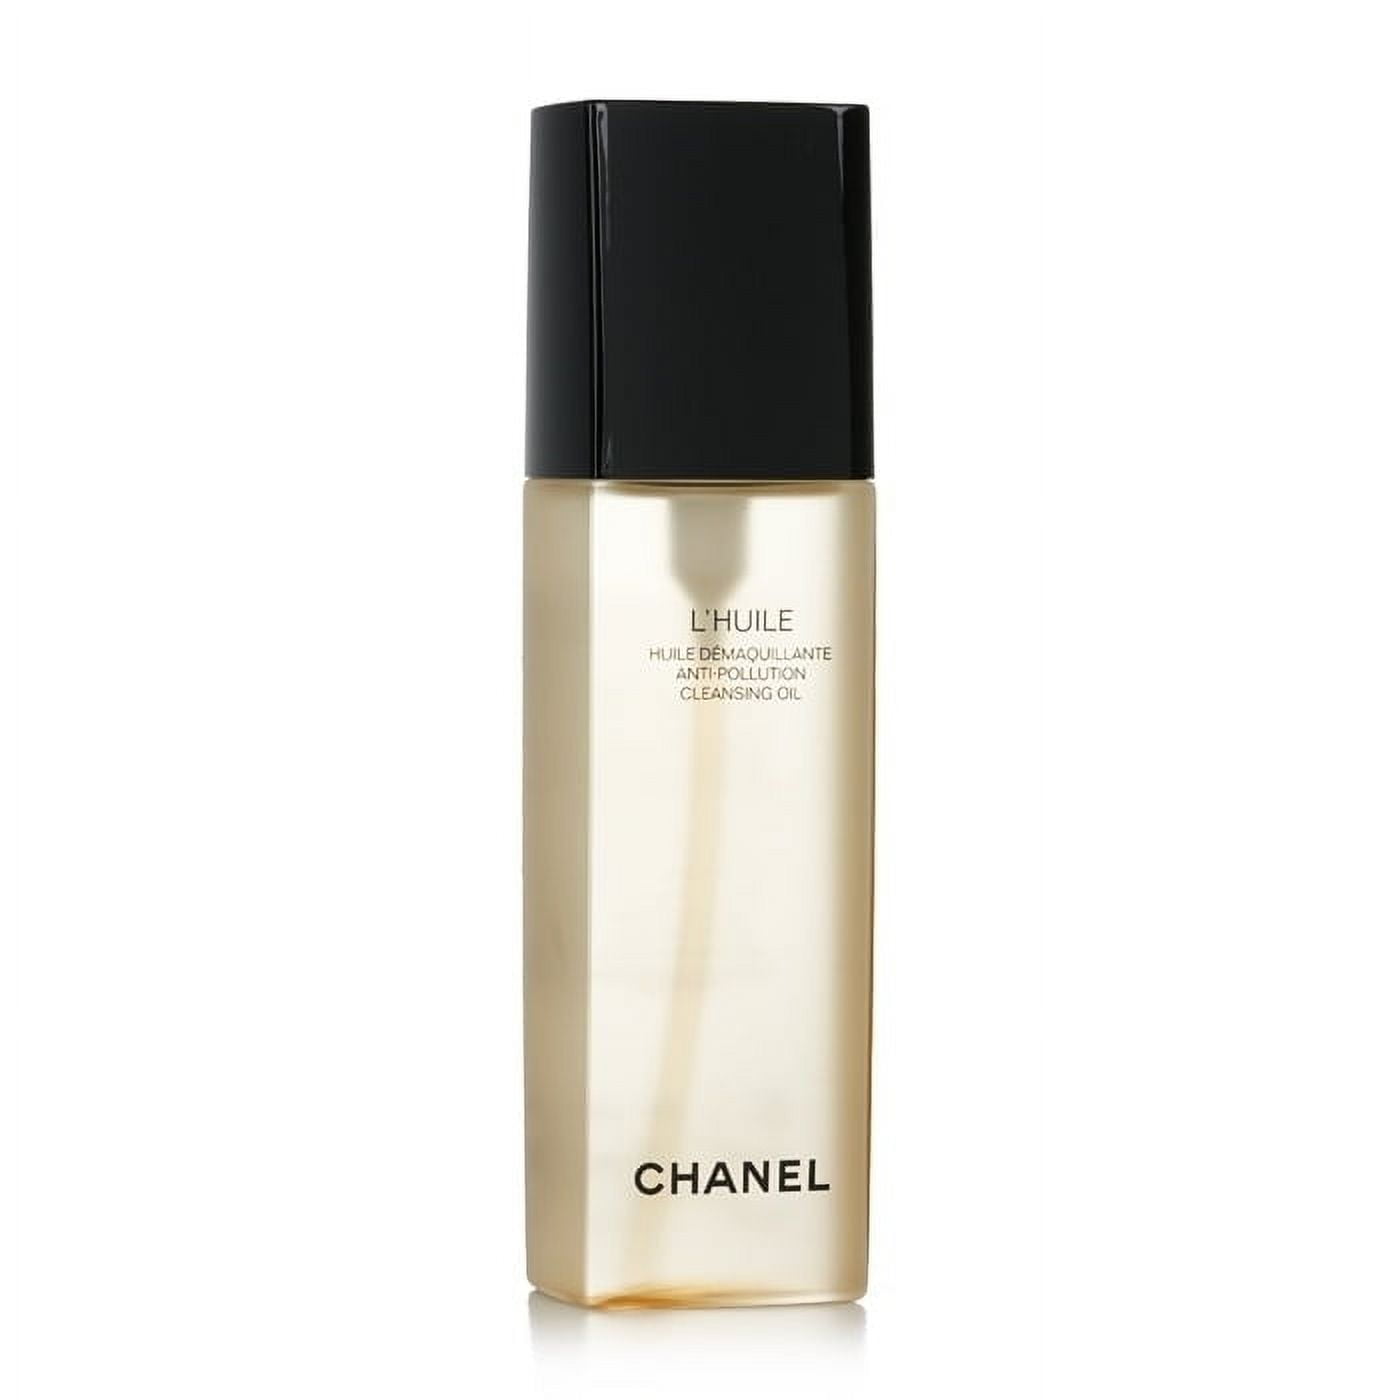 CHANEL L'HUILE Anti-Pollution CLEANSING OIL 150 ML - RH820